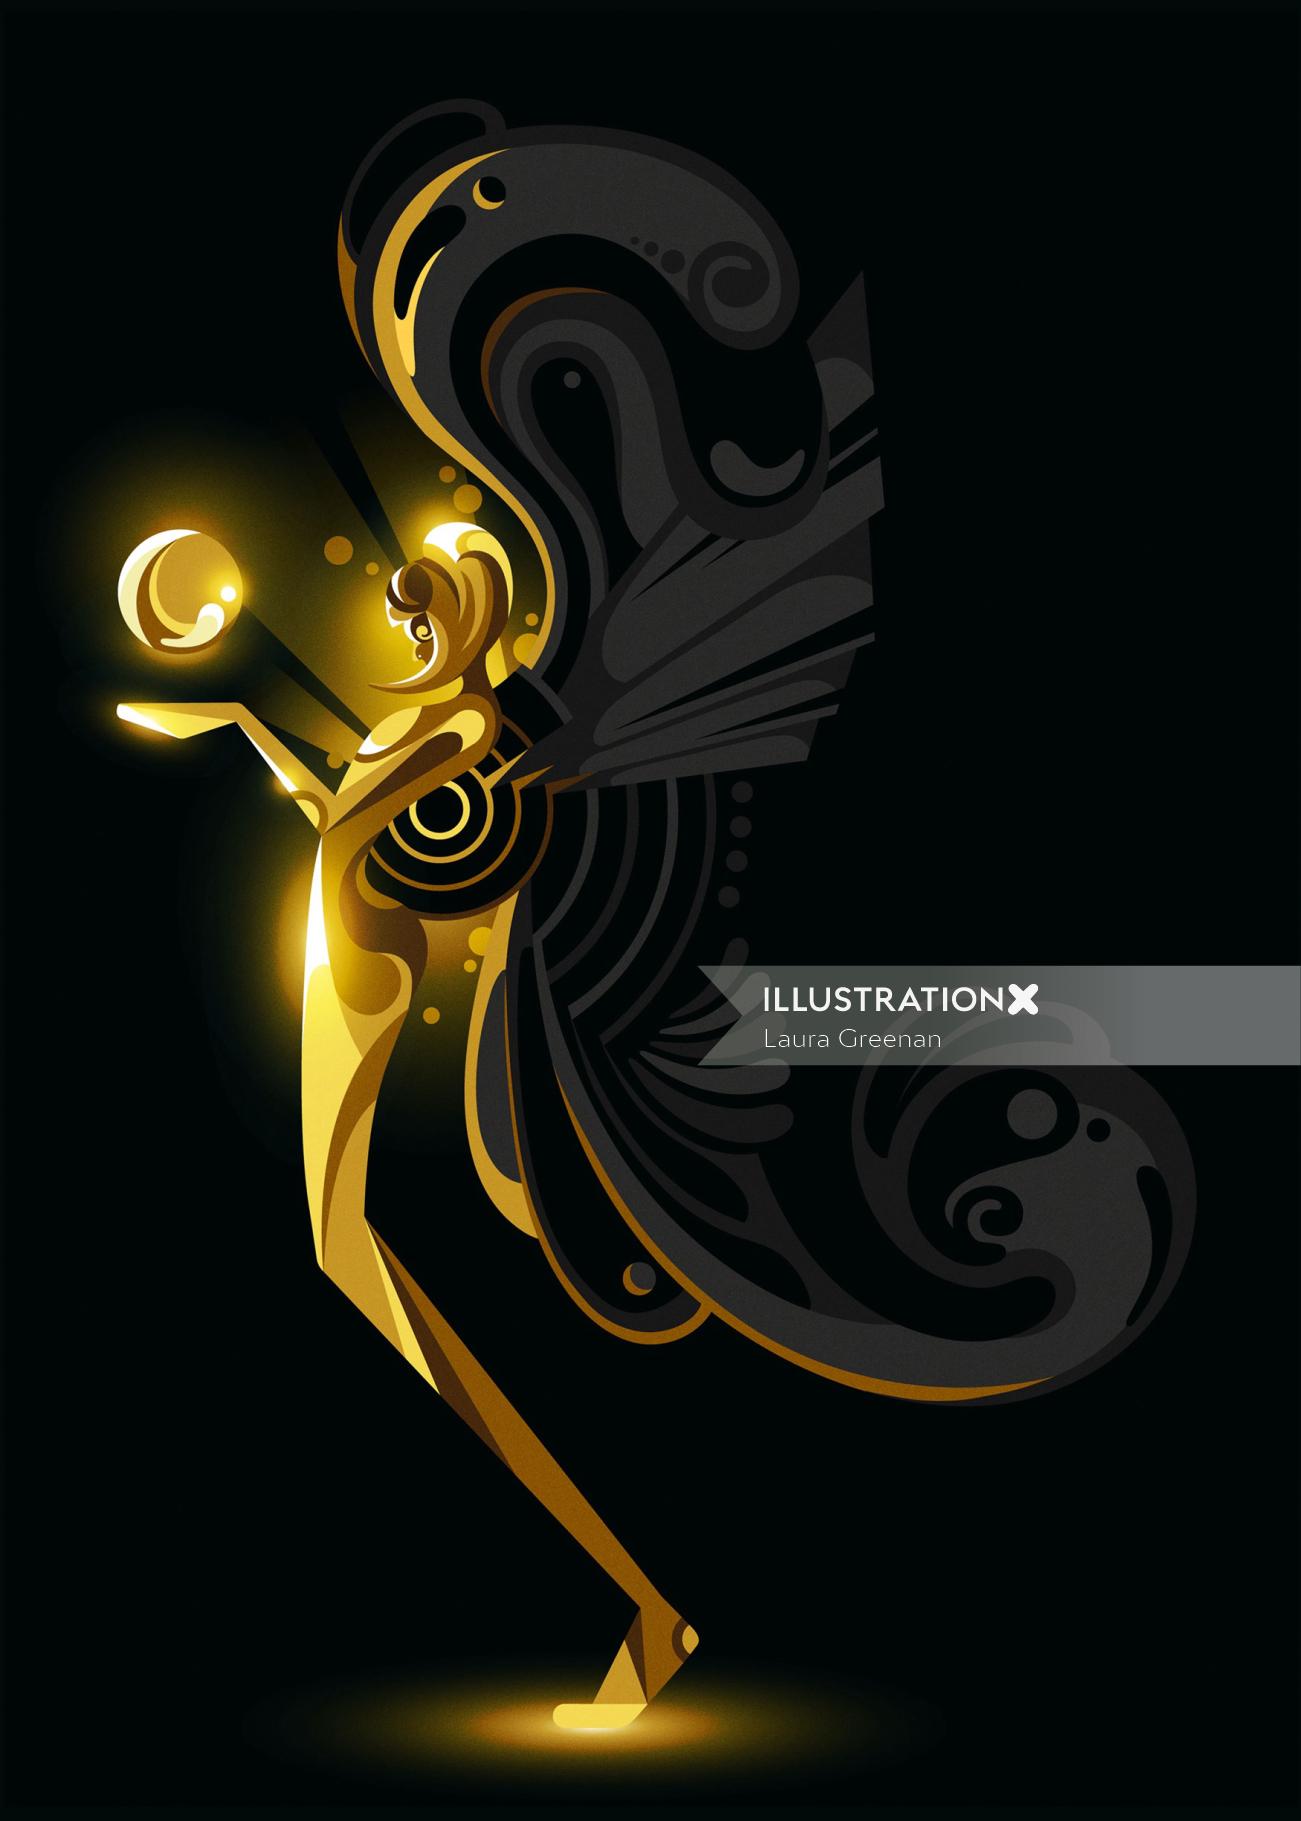 A shiny gold figure/angel with black wings.